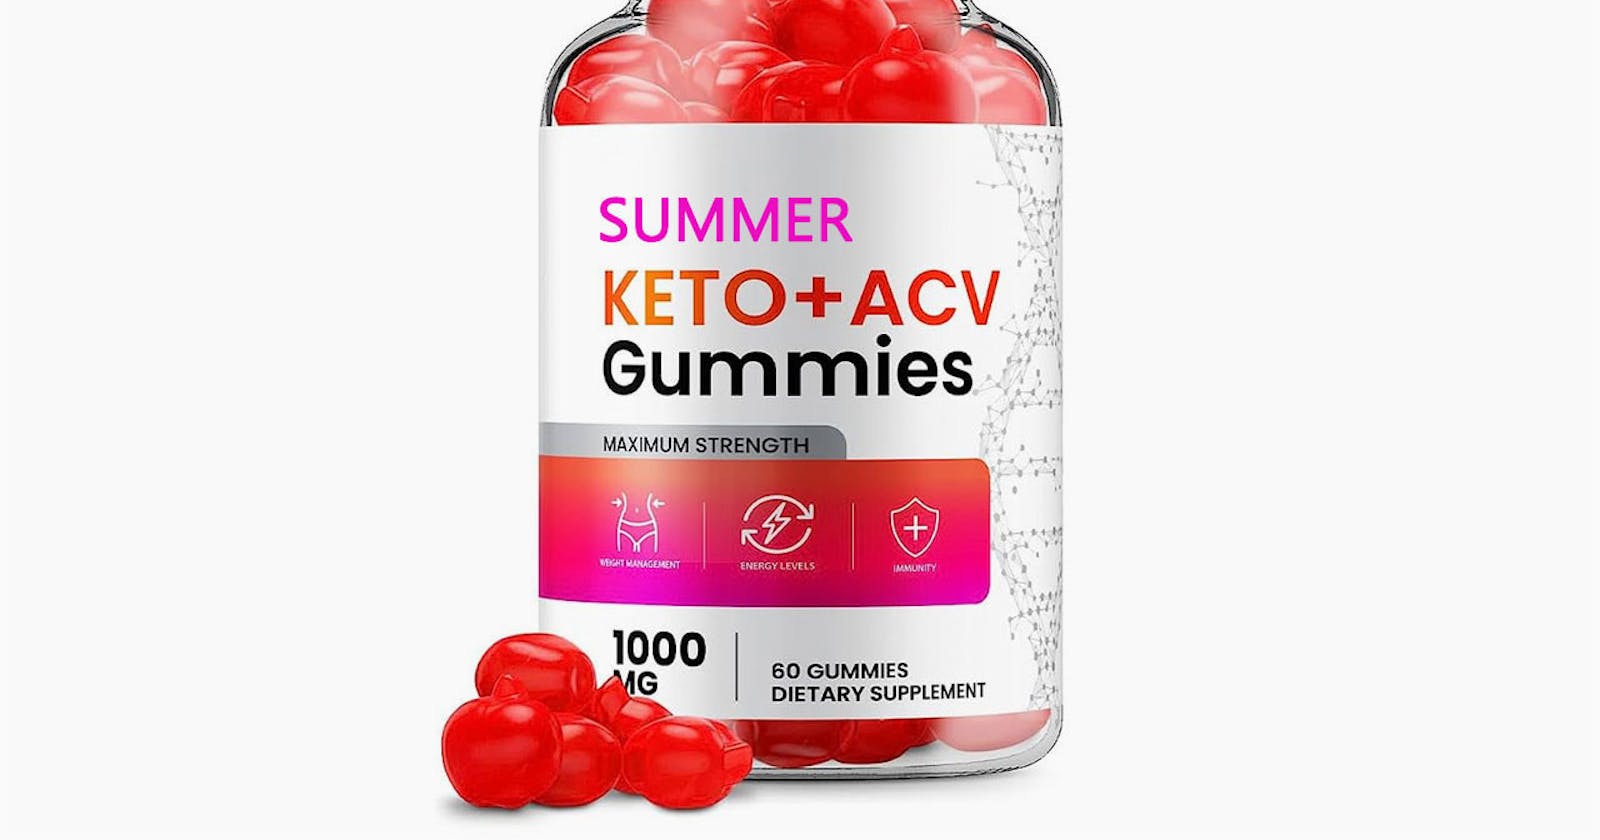 Summer Keto + ACV Gummies - GET EXTRA SLIM IN NO TIME!